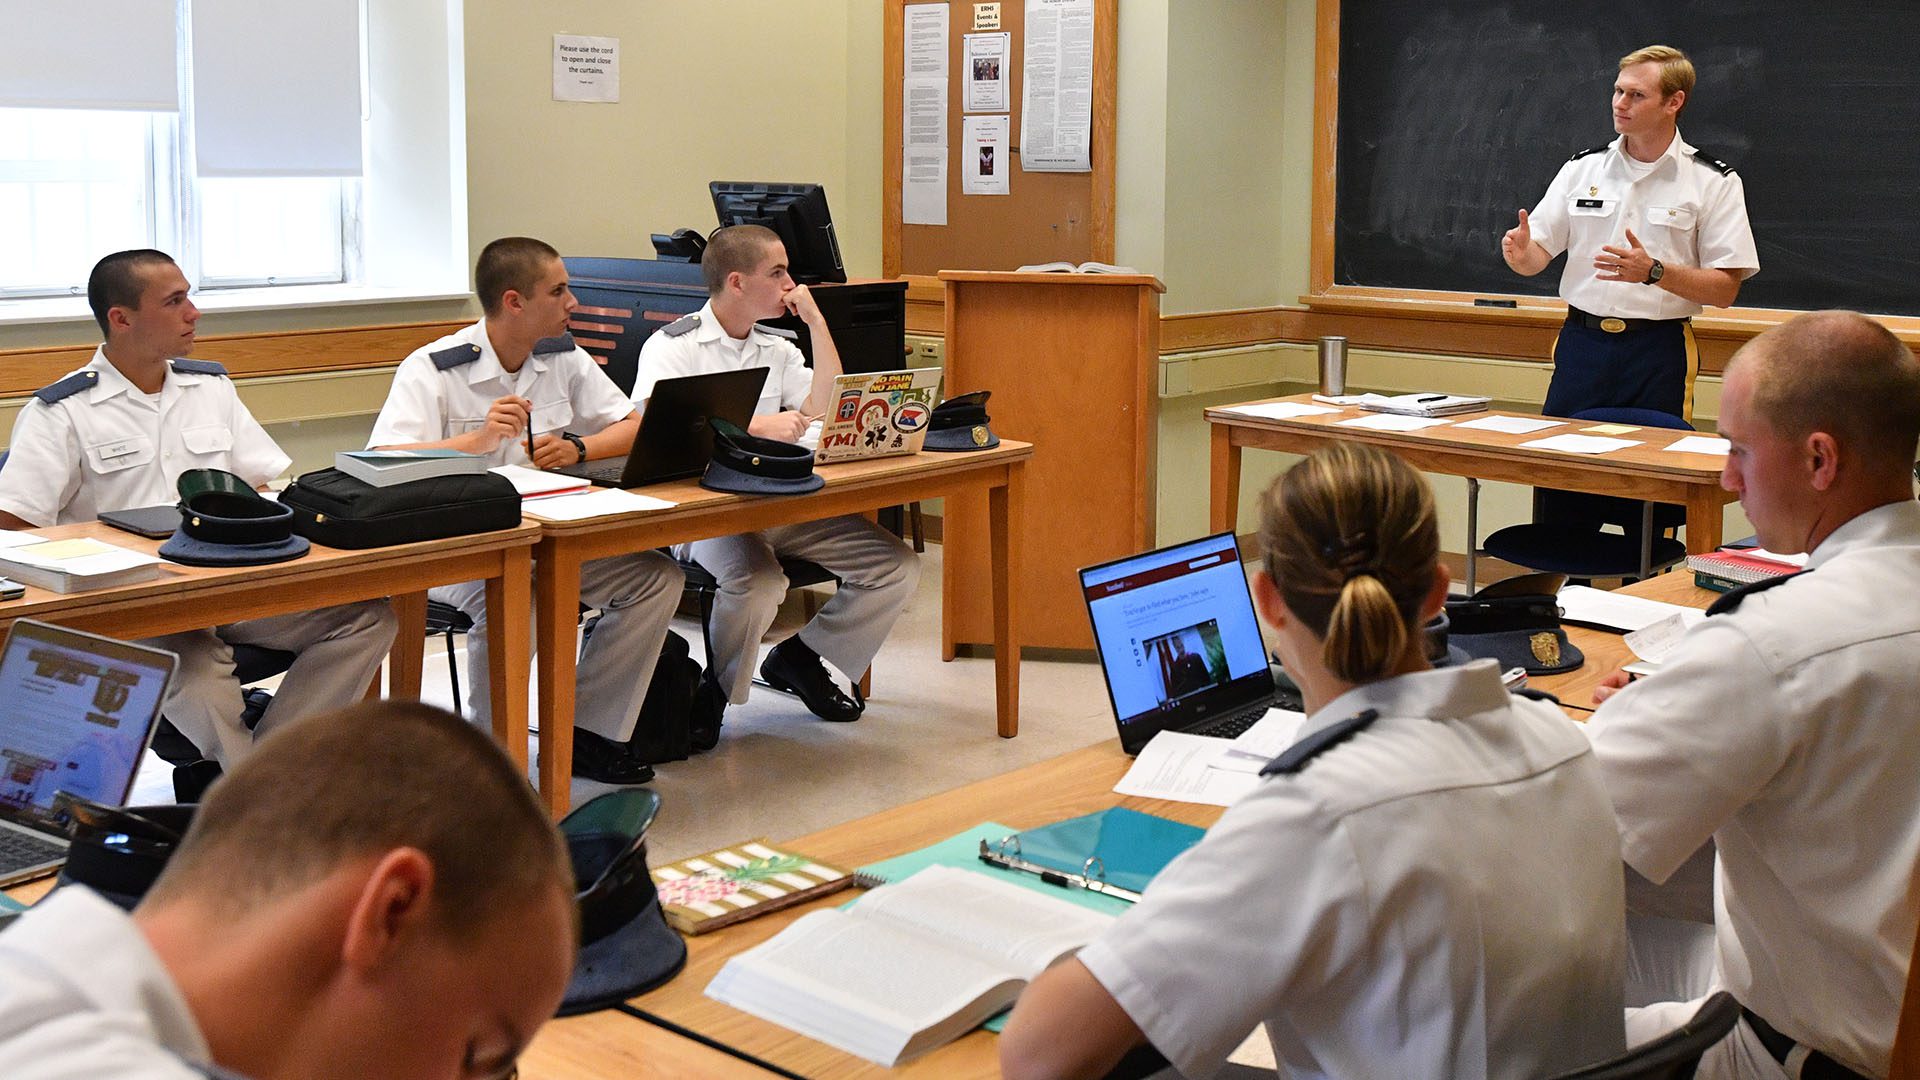 cadets in class being instructed by professor